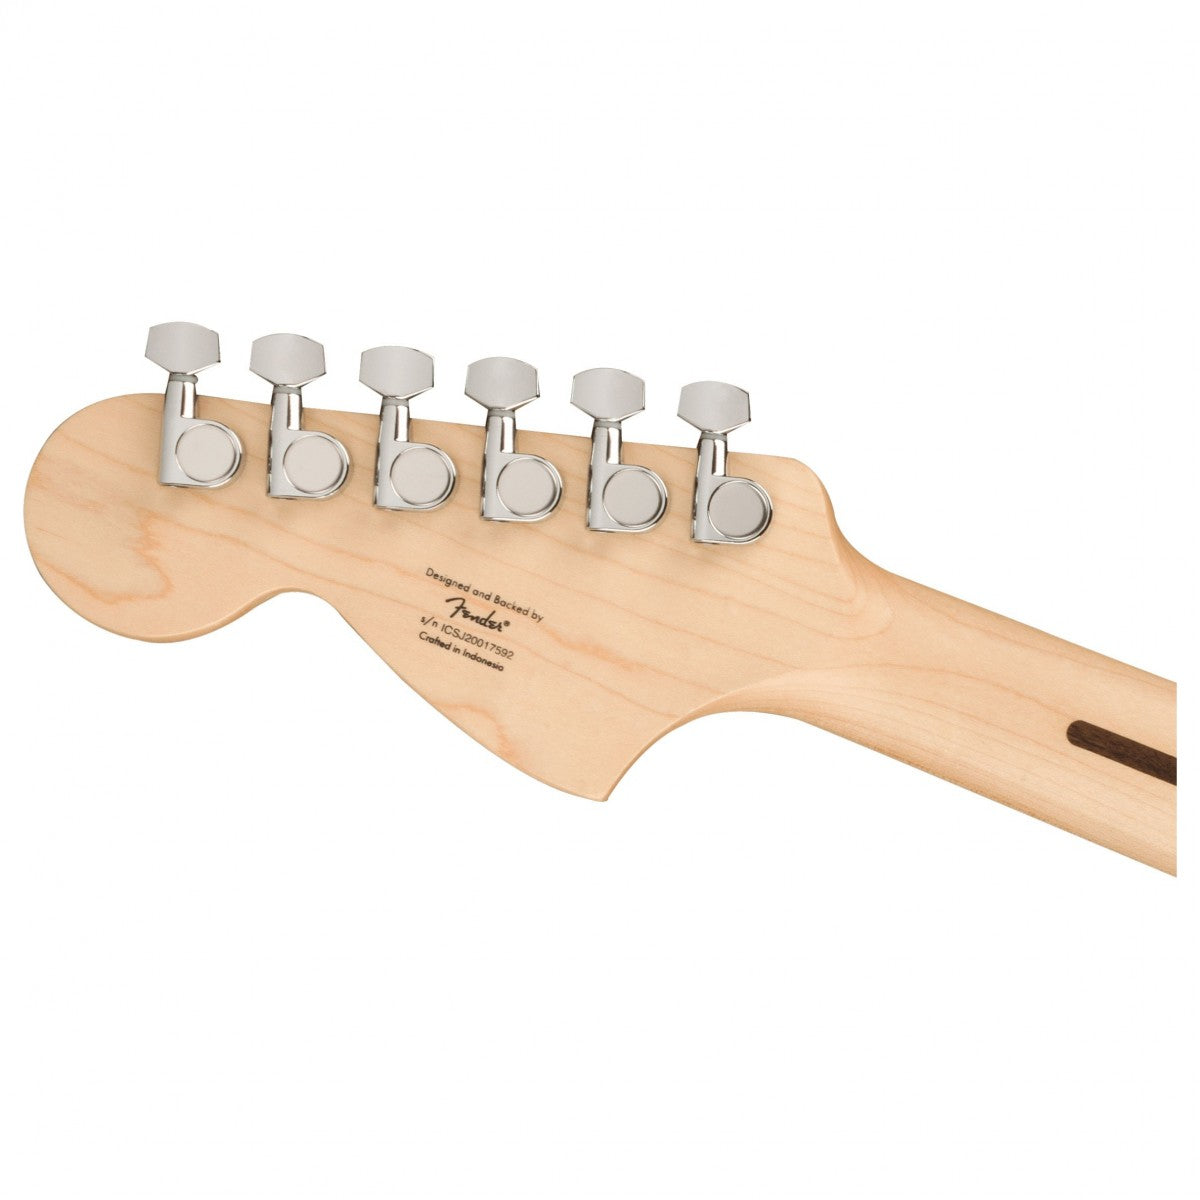 Squier Affinity Series Stratocaster FMT HSS, Maple Fingerboard - Việt Music